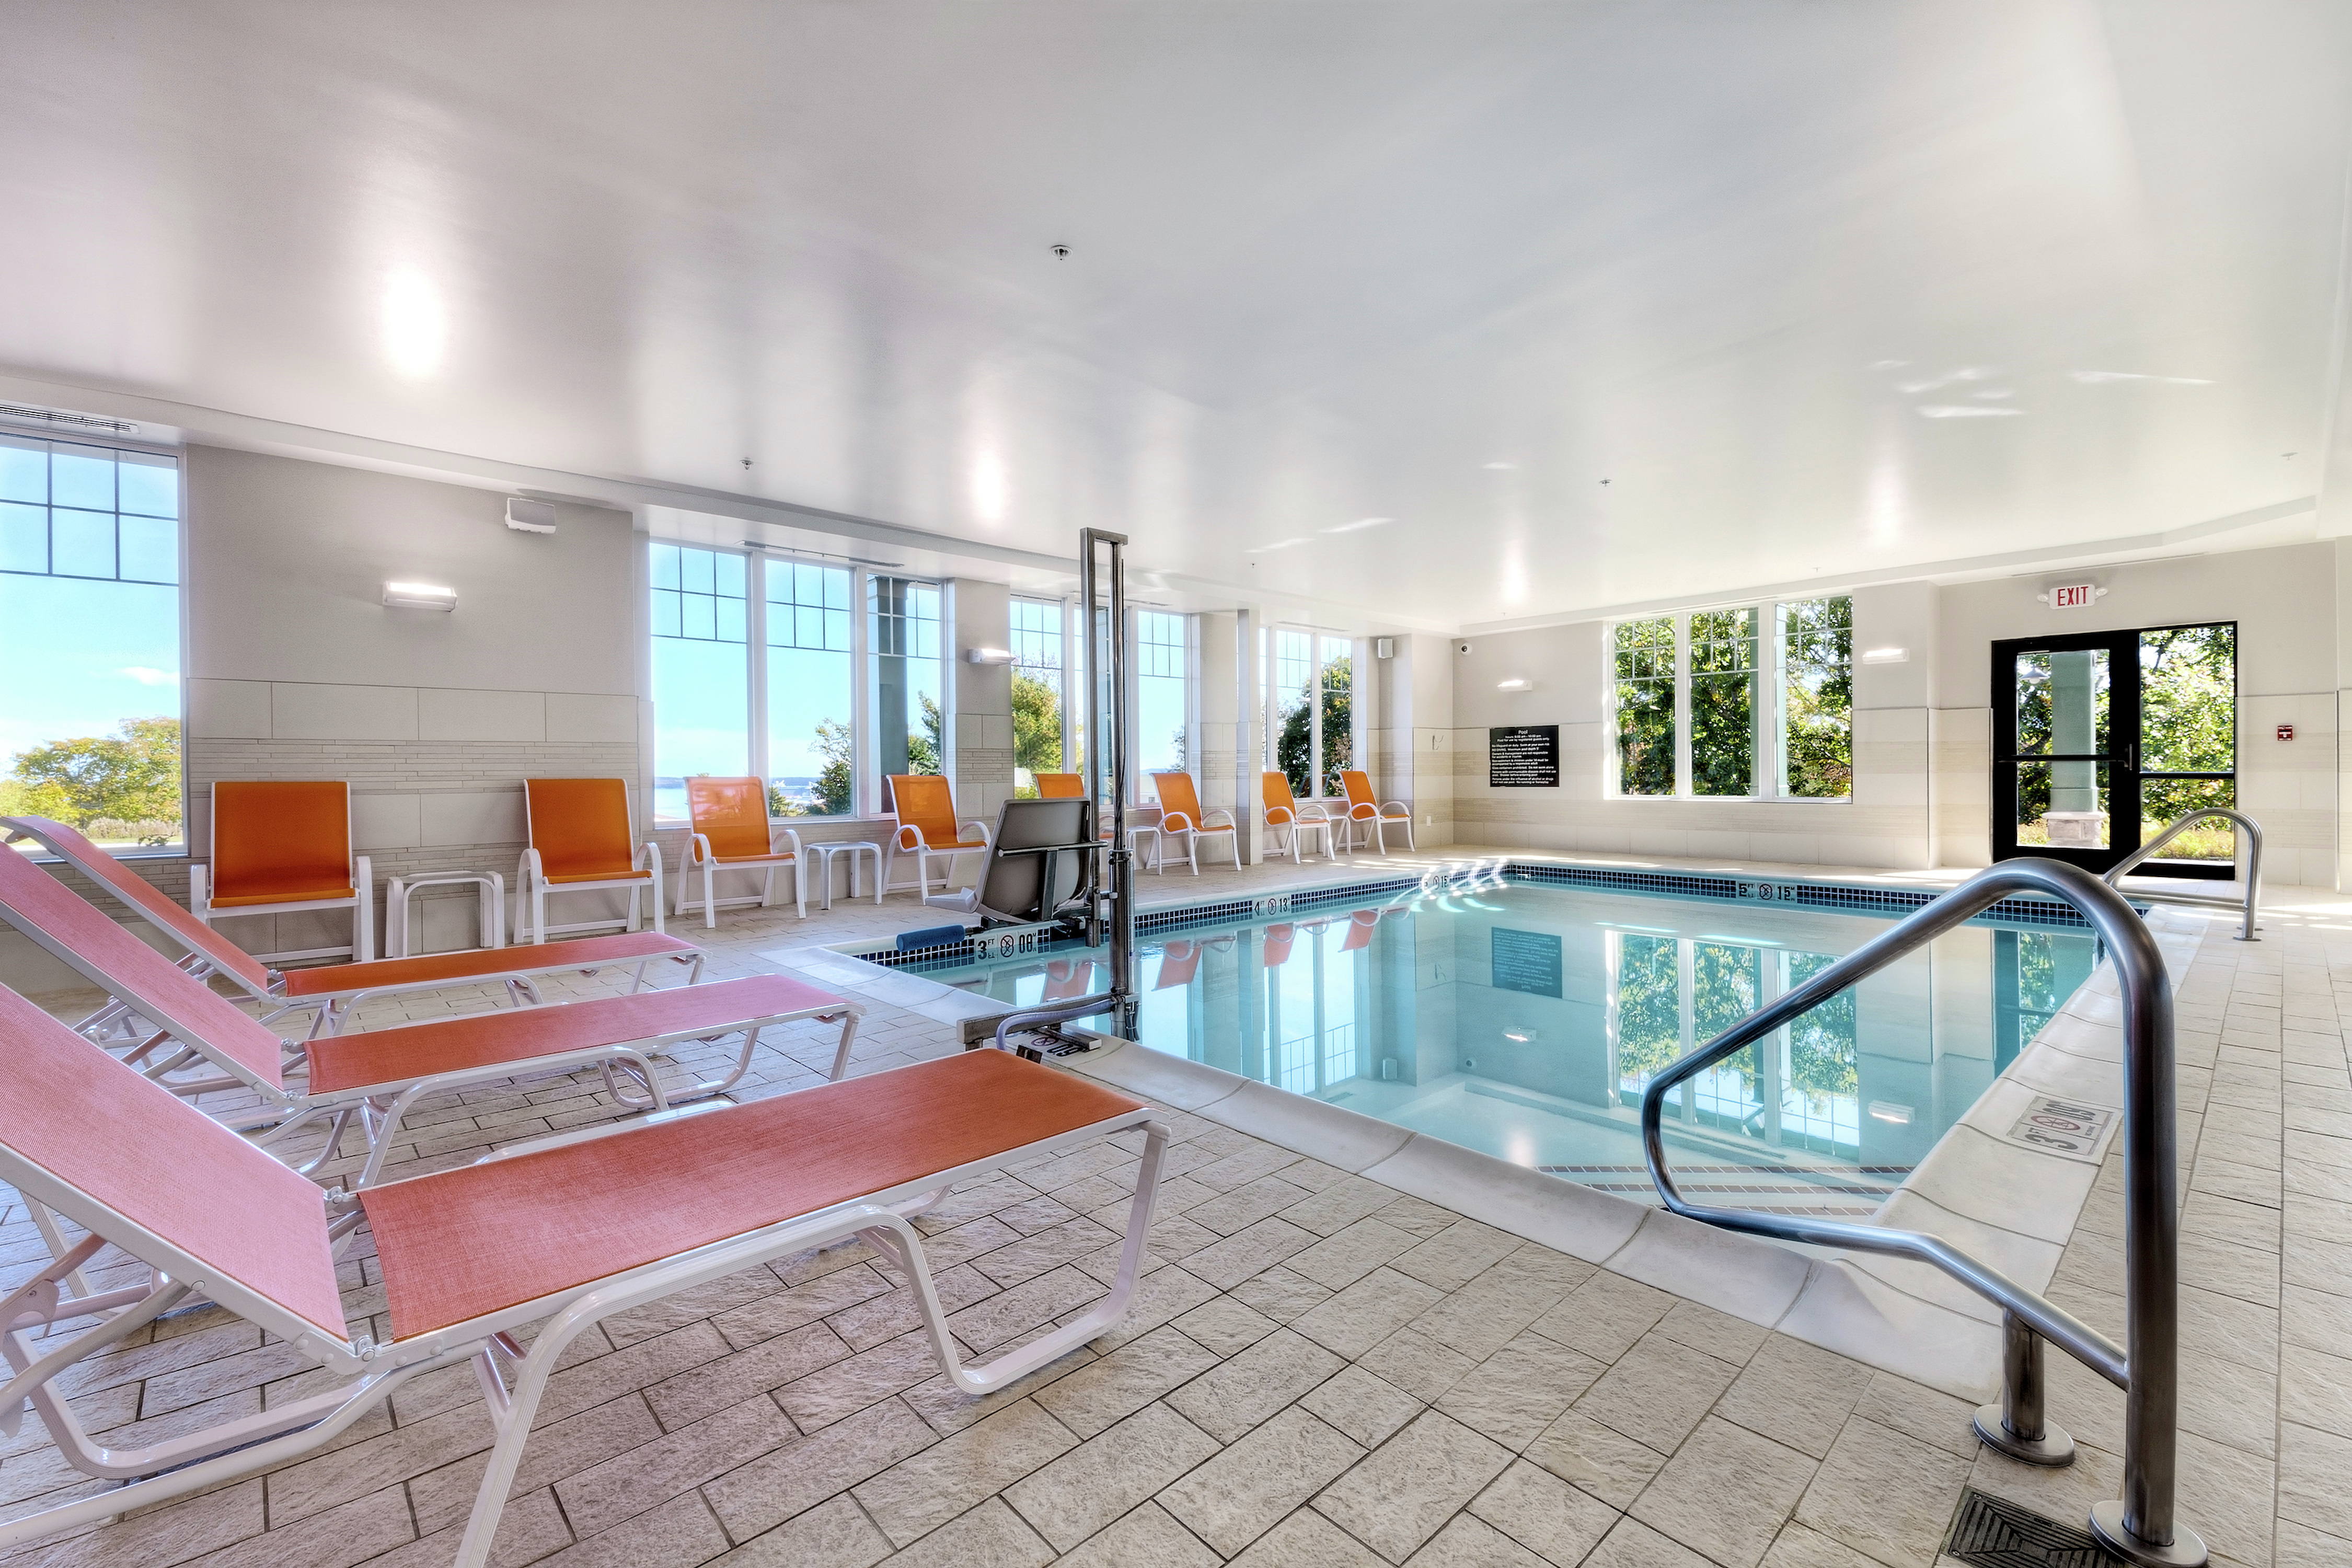 Indoor Pool with Deck Seating